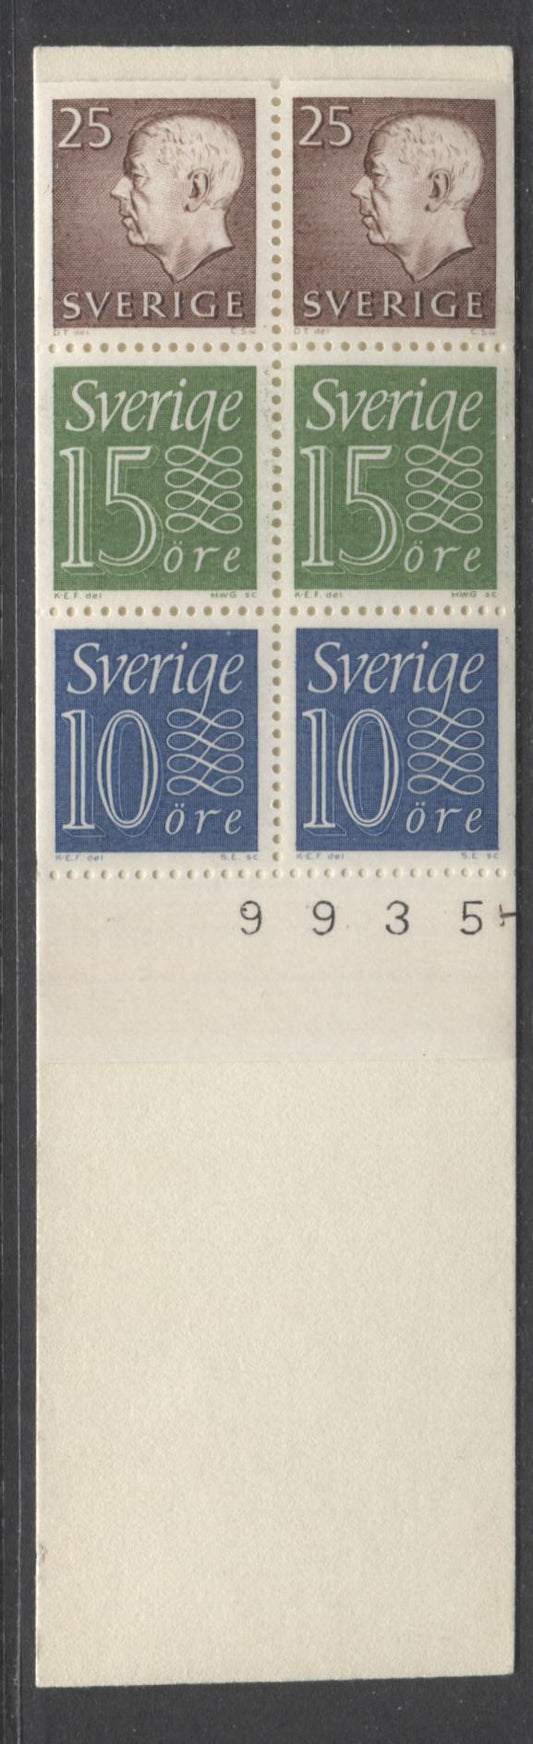 Lot 157 Sweden SC#580a (Facit #HA14A2O) 1965  King Gustav VI Adolf Definitive Issue, 3-Line Text and Doves Back Cover, Inverted Pane, Cylinder 1 Horizontal & 4 Digits of Control Number In Selvedge, A VFNH Booklet of 6 (2 +2+2), Estimated Value $22